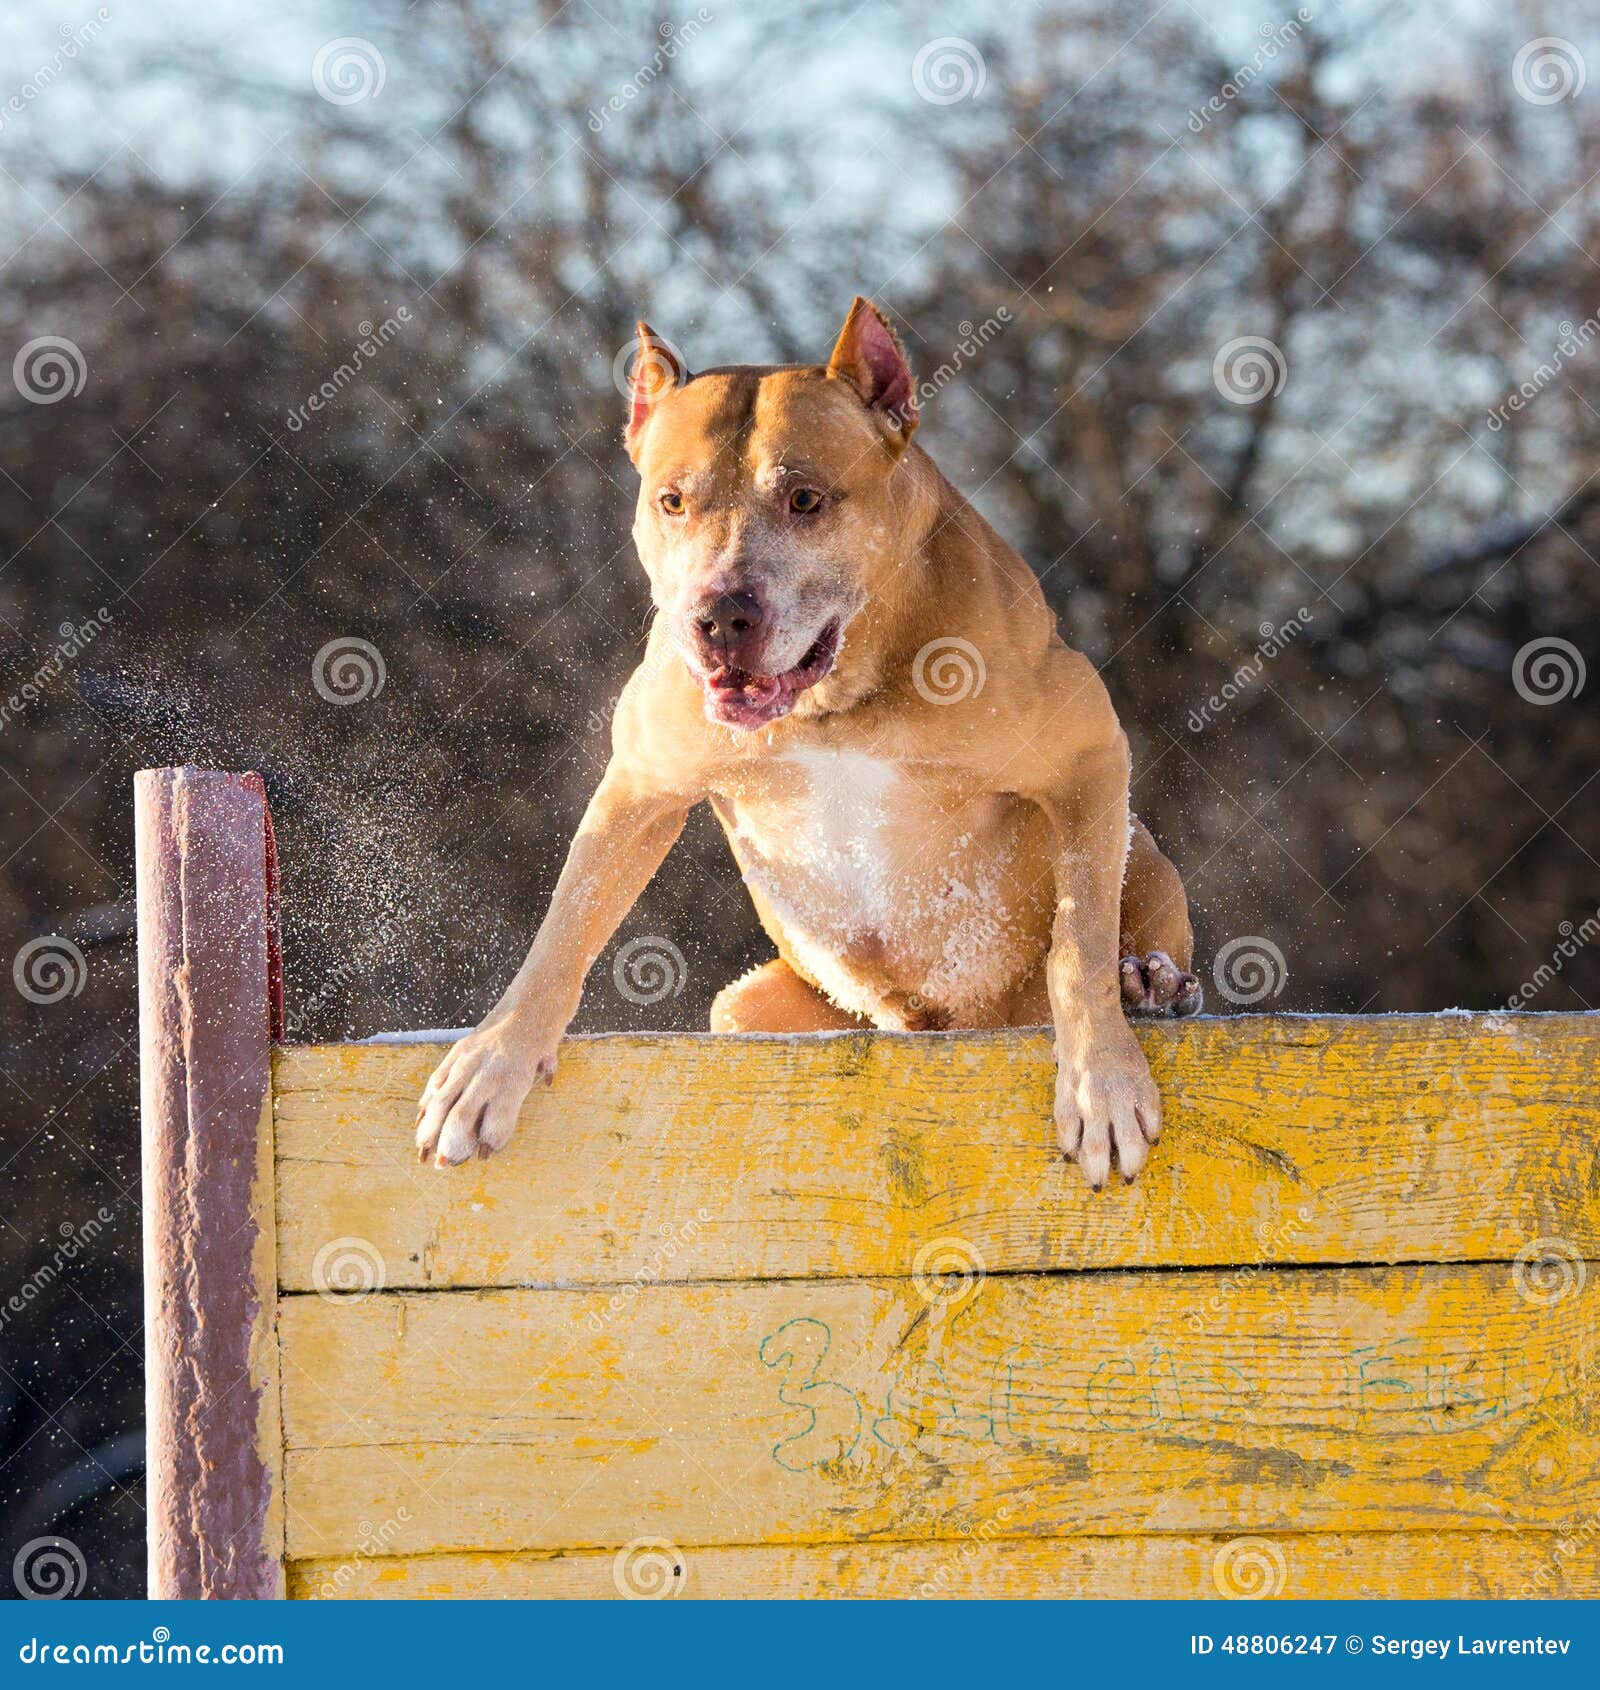 American Pit Bull Terrier Jumps Over Hurdle Stock Photo ...